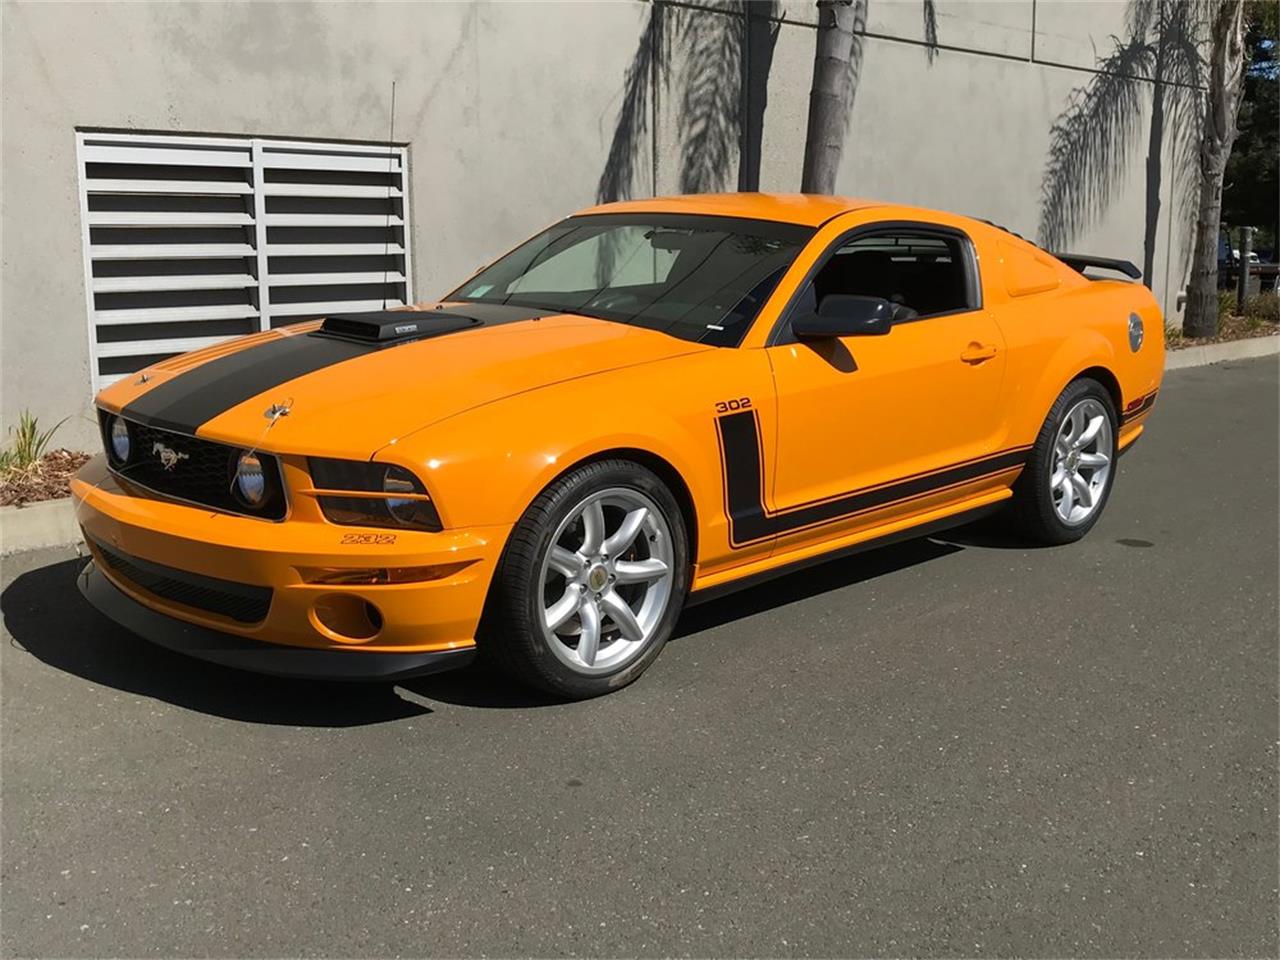 For Sale: 2007 Ford Mustang (Saleen) in Napa Valley, California.